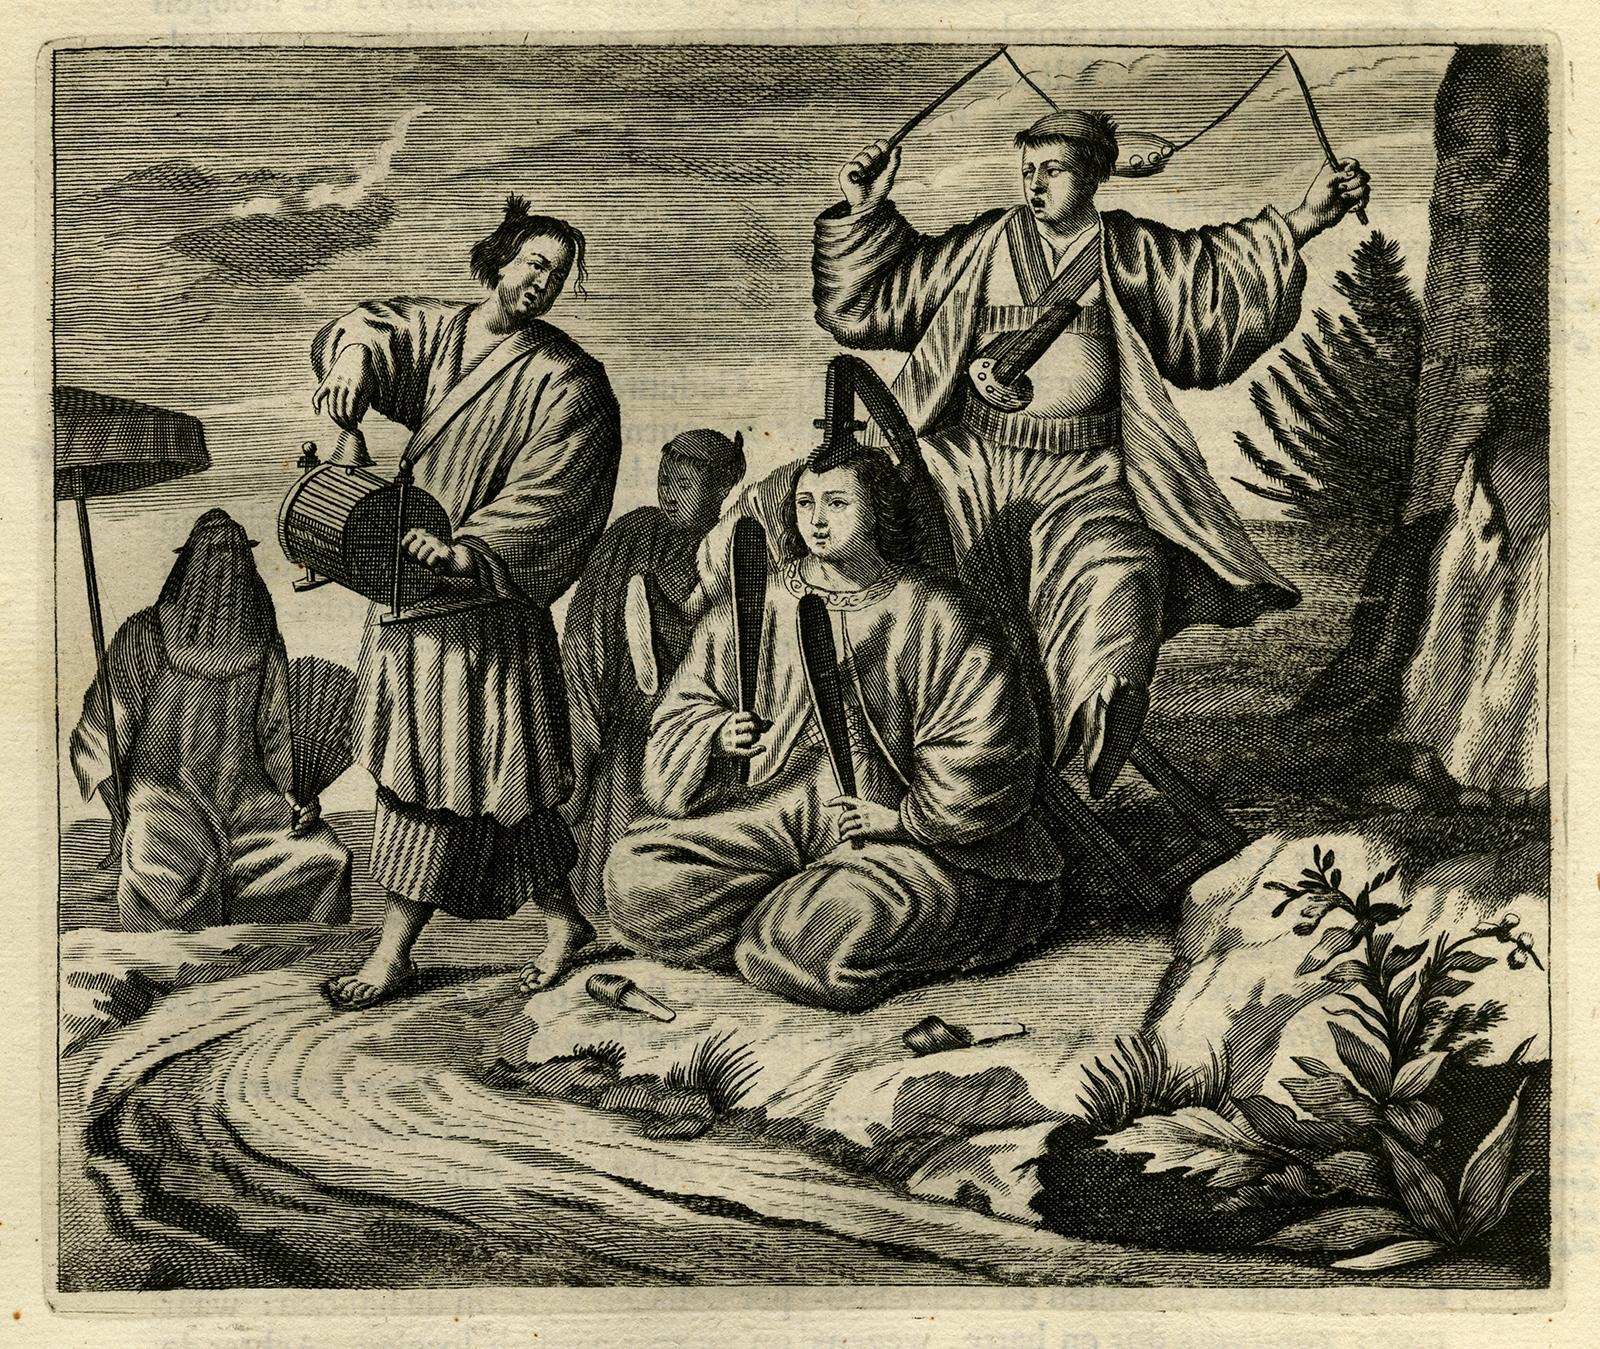 Antique print, titled: 'Japansche kamerspeelders.' - ('Japanese musicians'). 

Four chamber musicians are playing on native instruments outside. Arnoldus Montanus' 